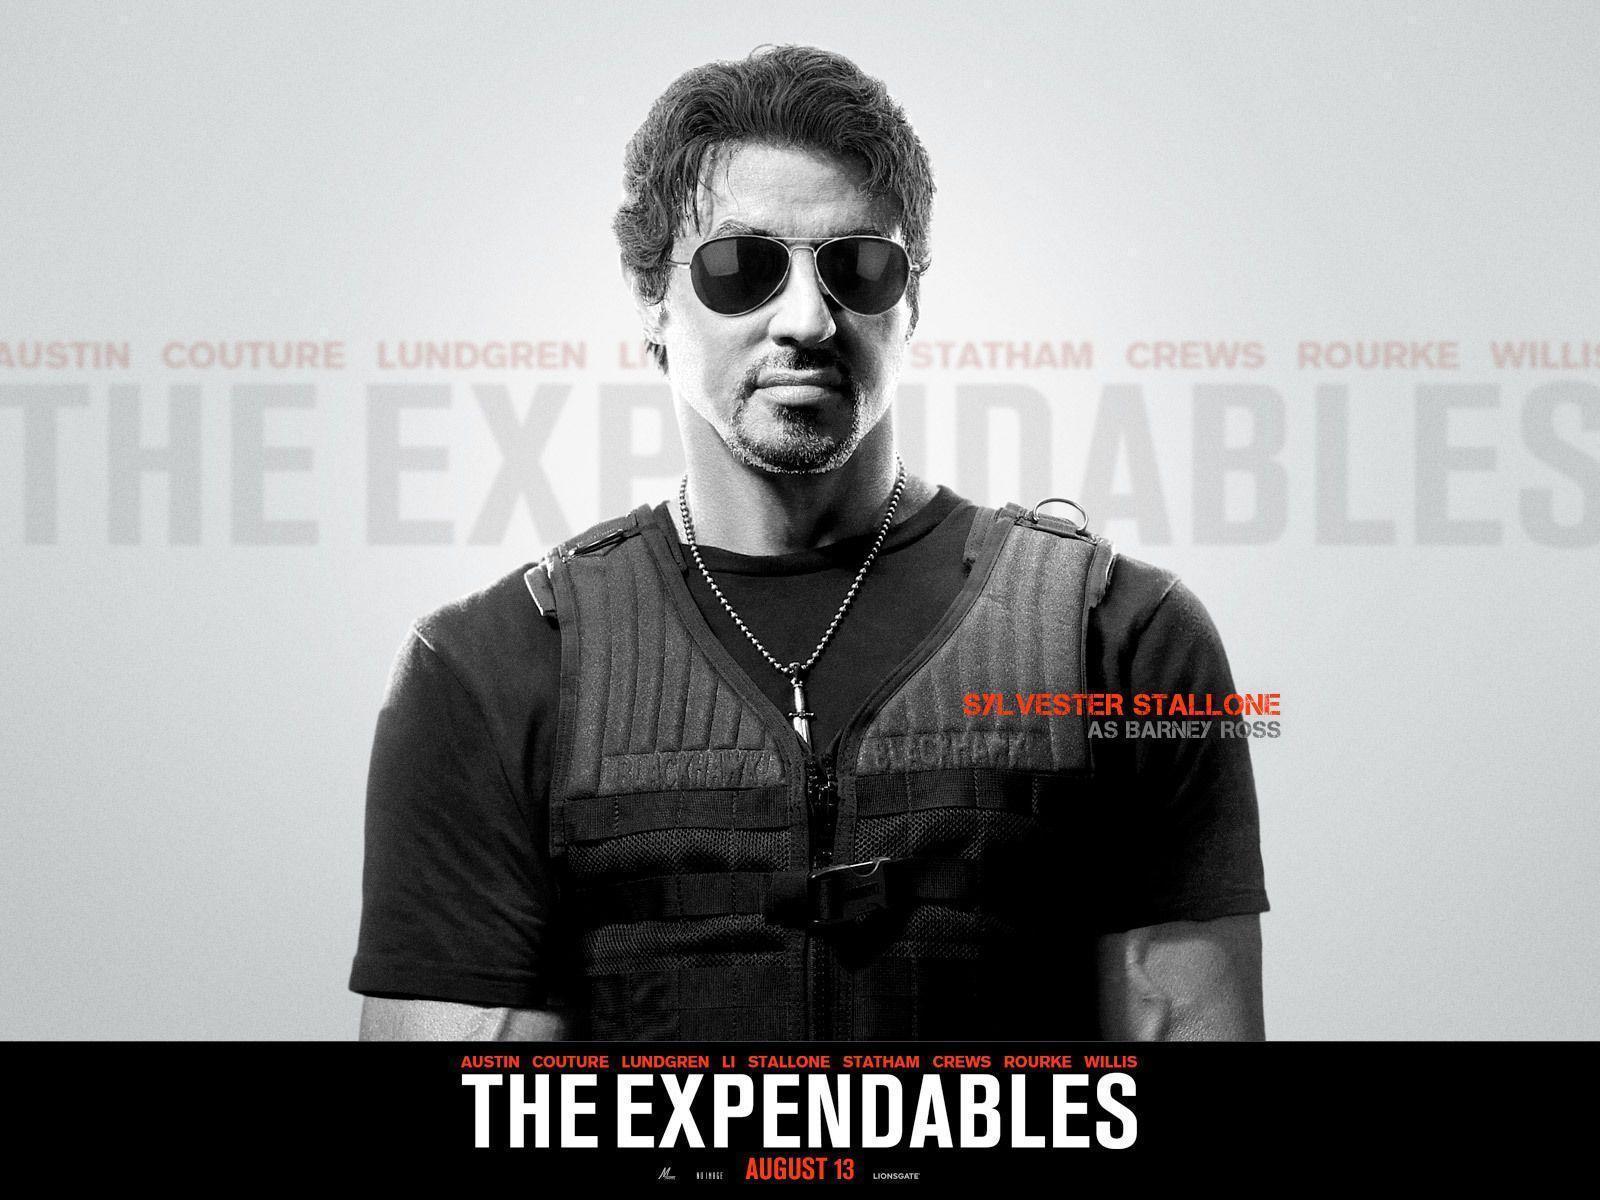 Sylvester Stallone as Barney Ross in The Expendables widescreen